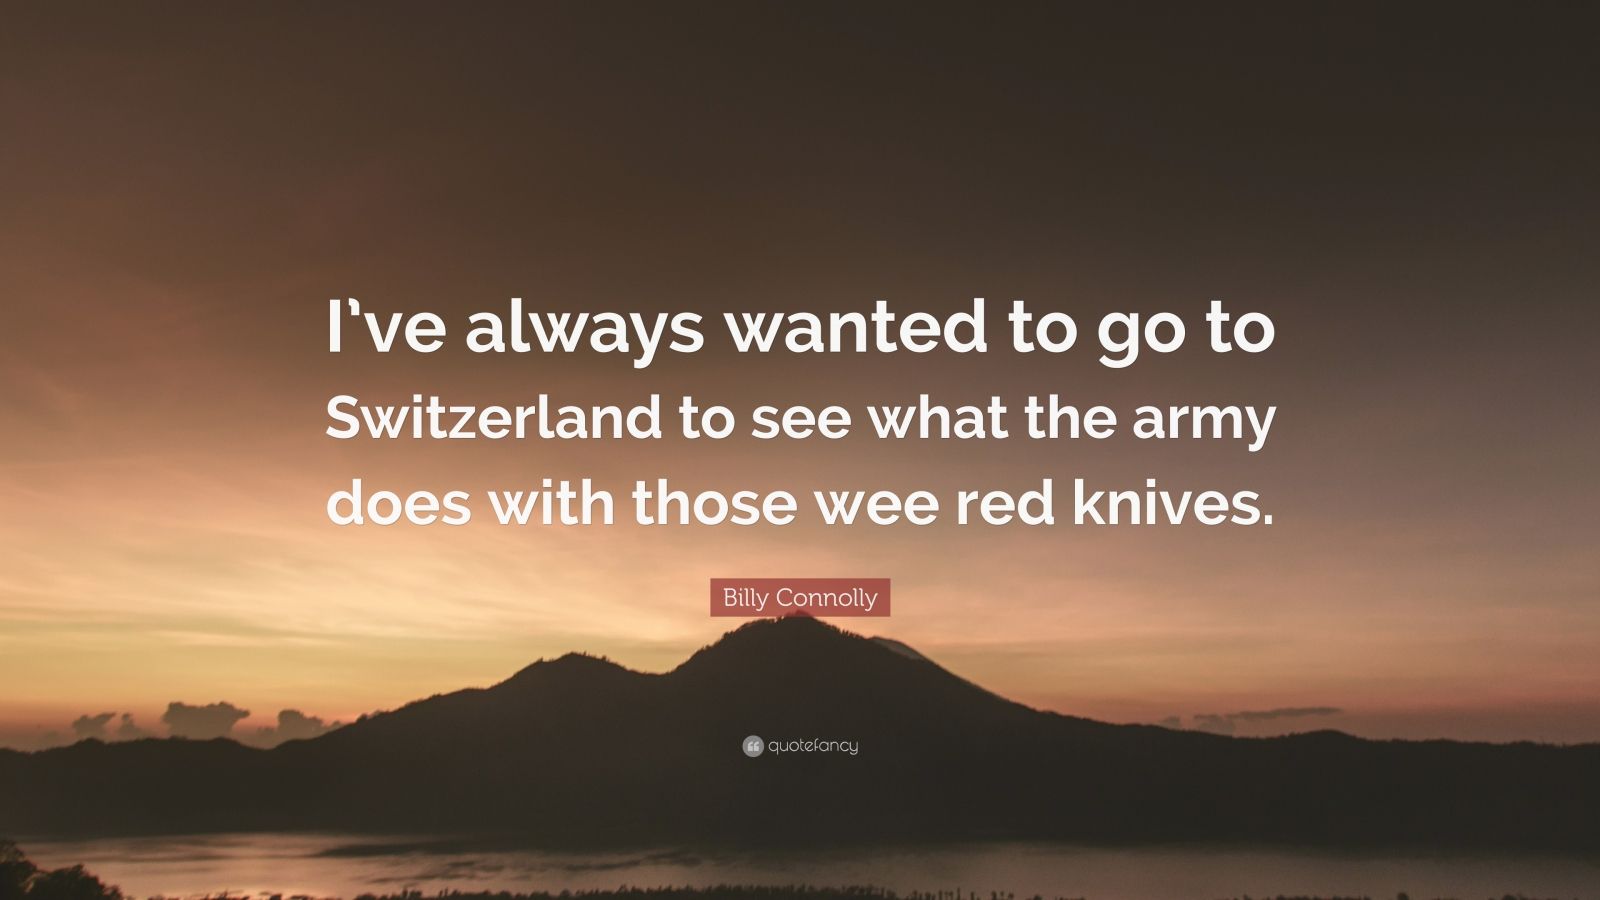 Billy Connolly Quote: “I’ve always wanted to go to Switzerland to see ...